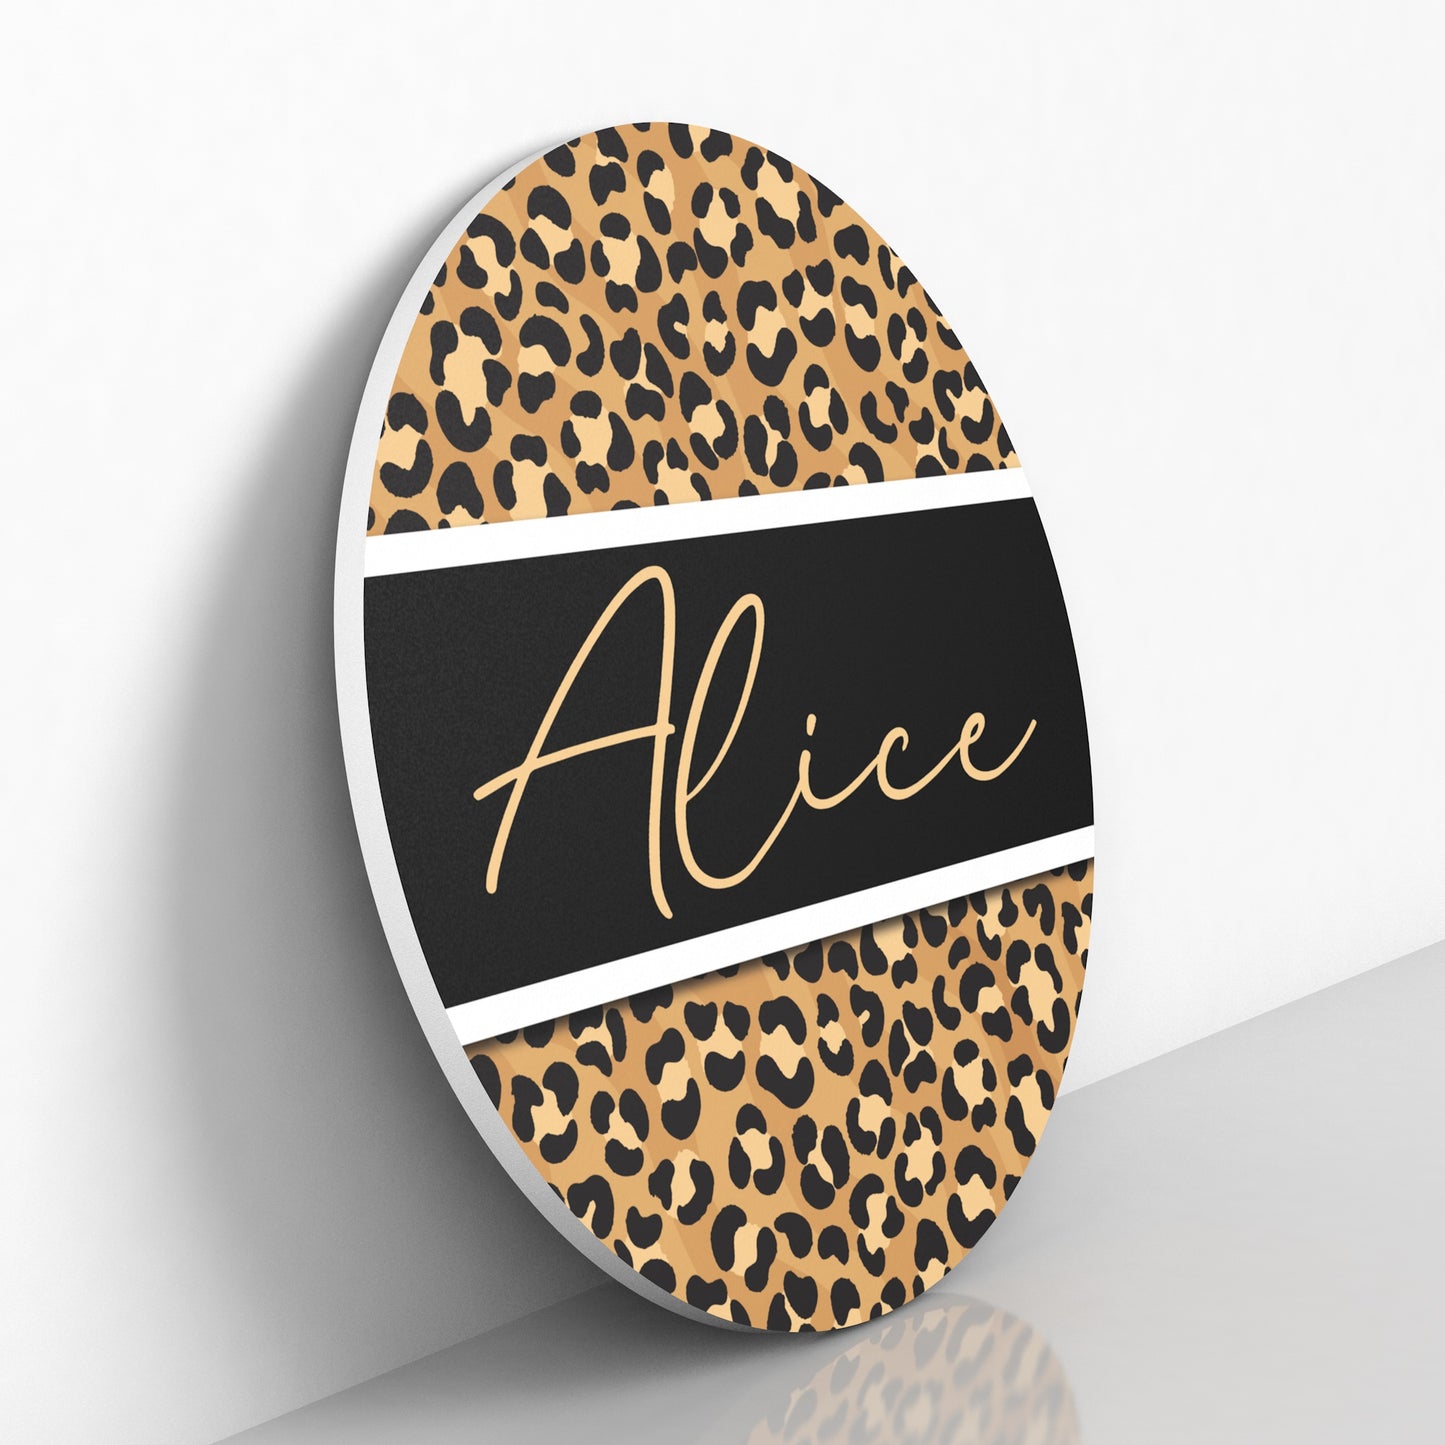 Leopard Print Name Sign - Personalized Name Sign - Leopard Home Decor